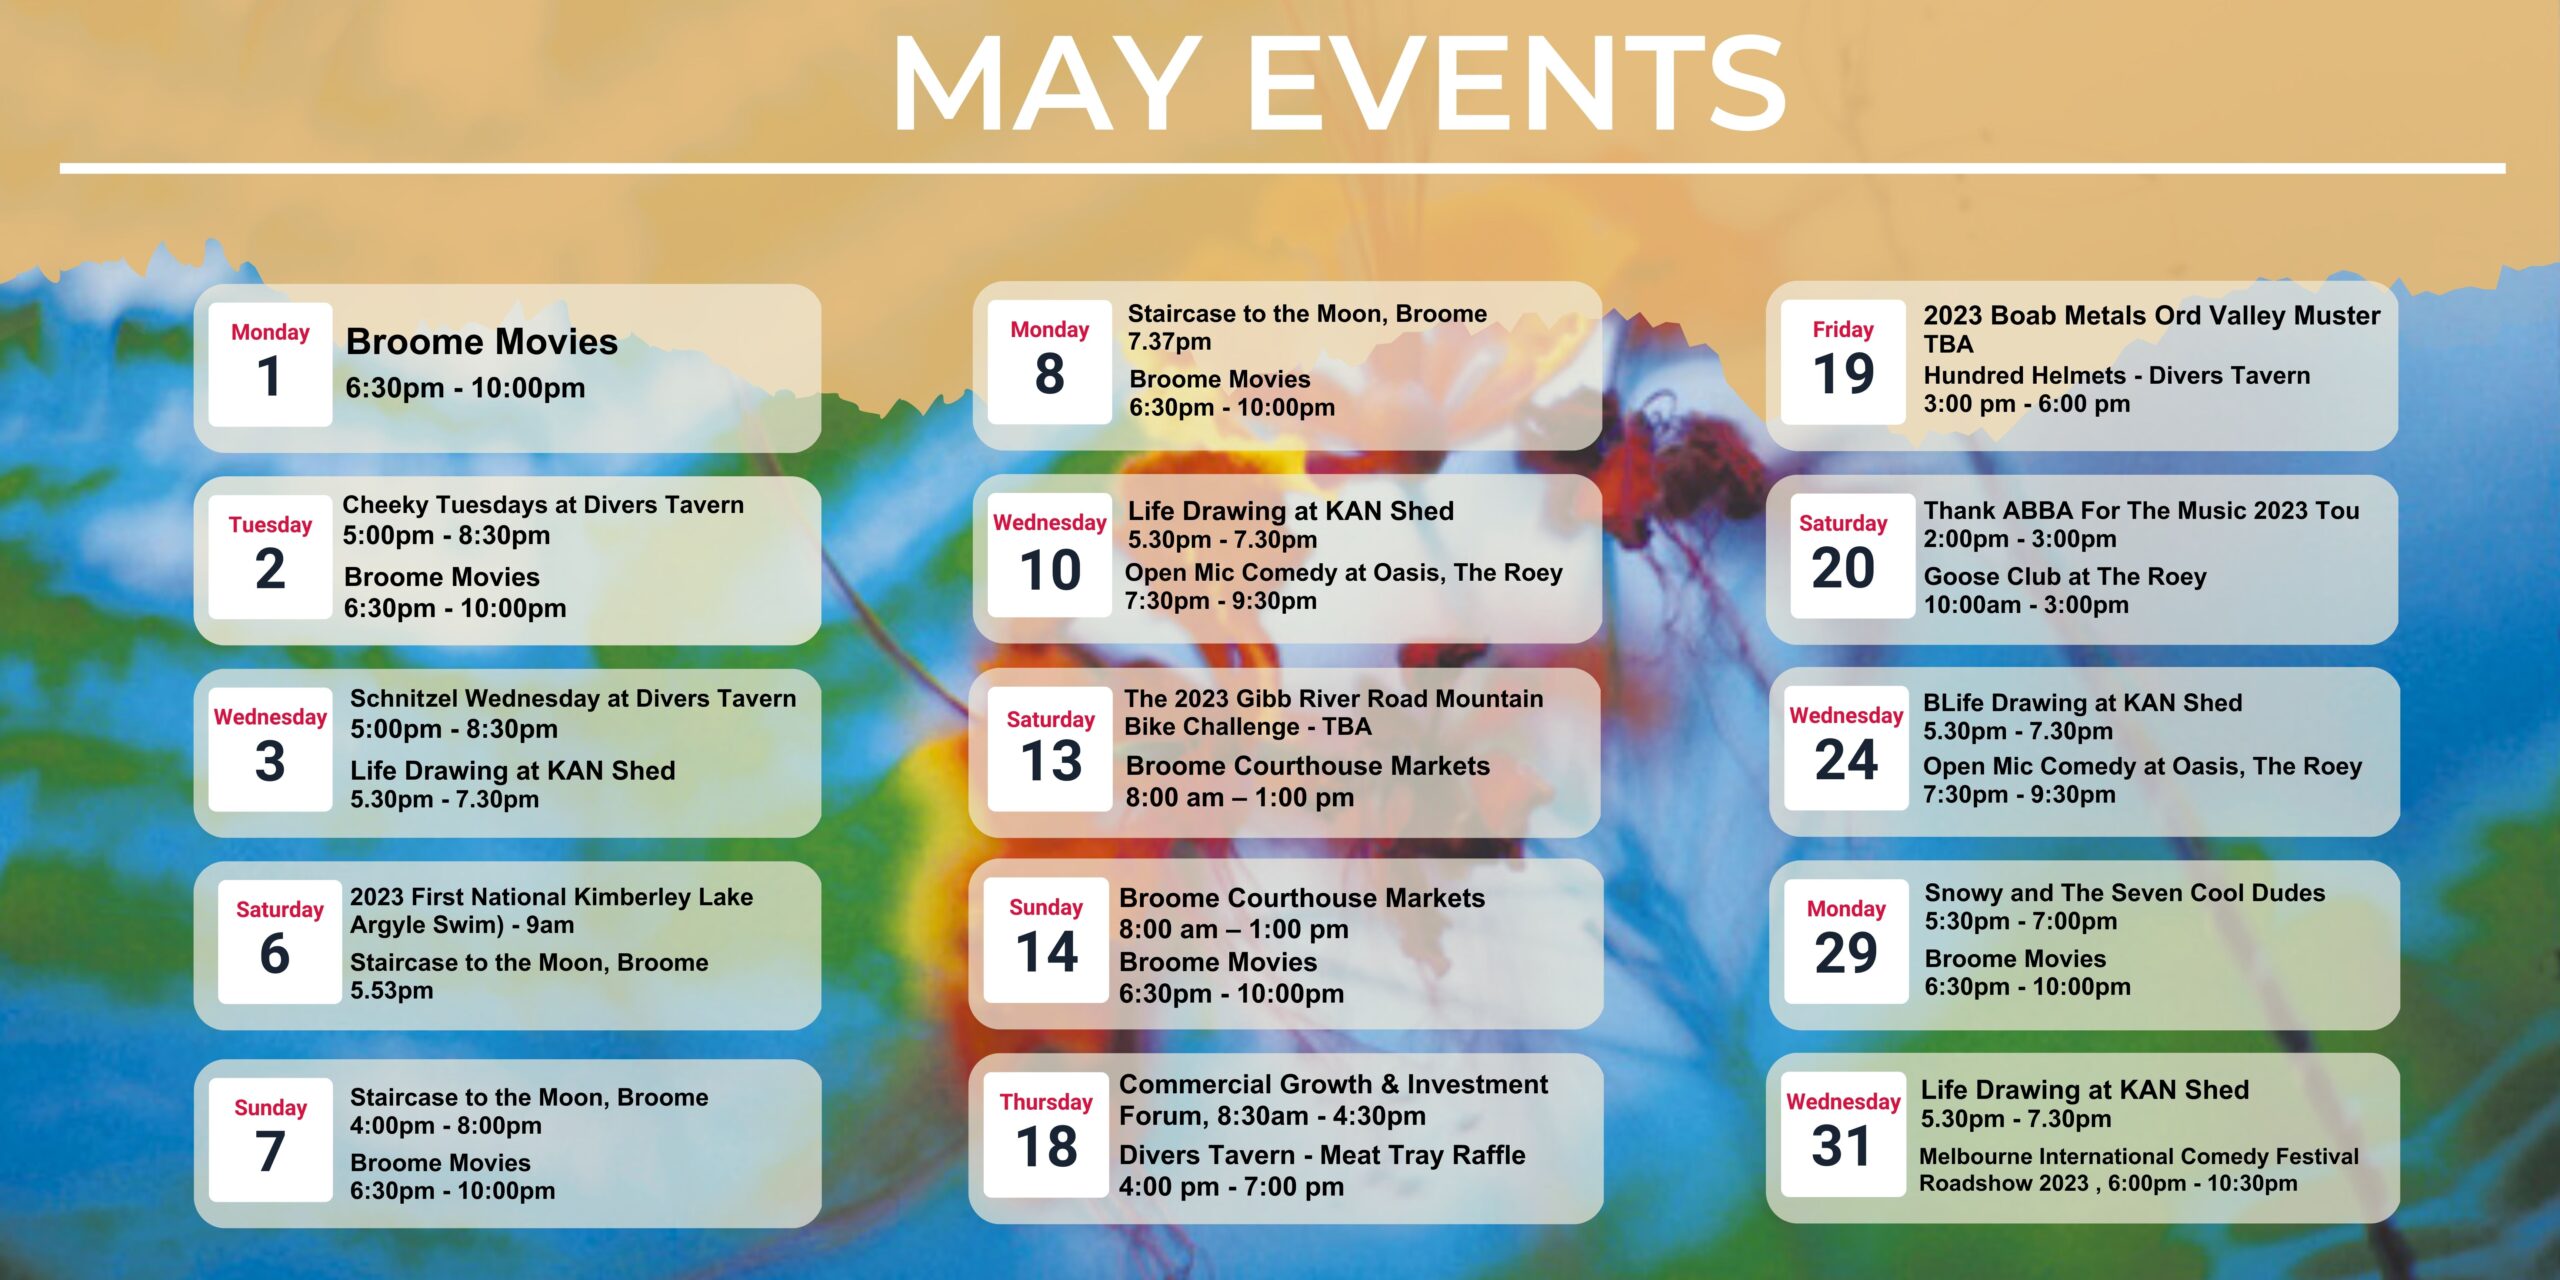 Broome Events: Time and Schedule